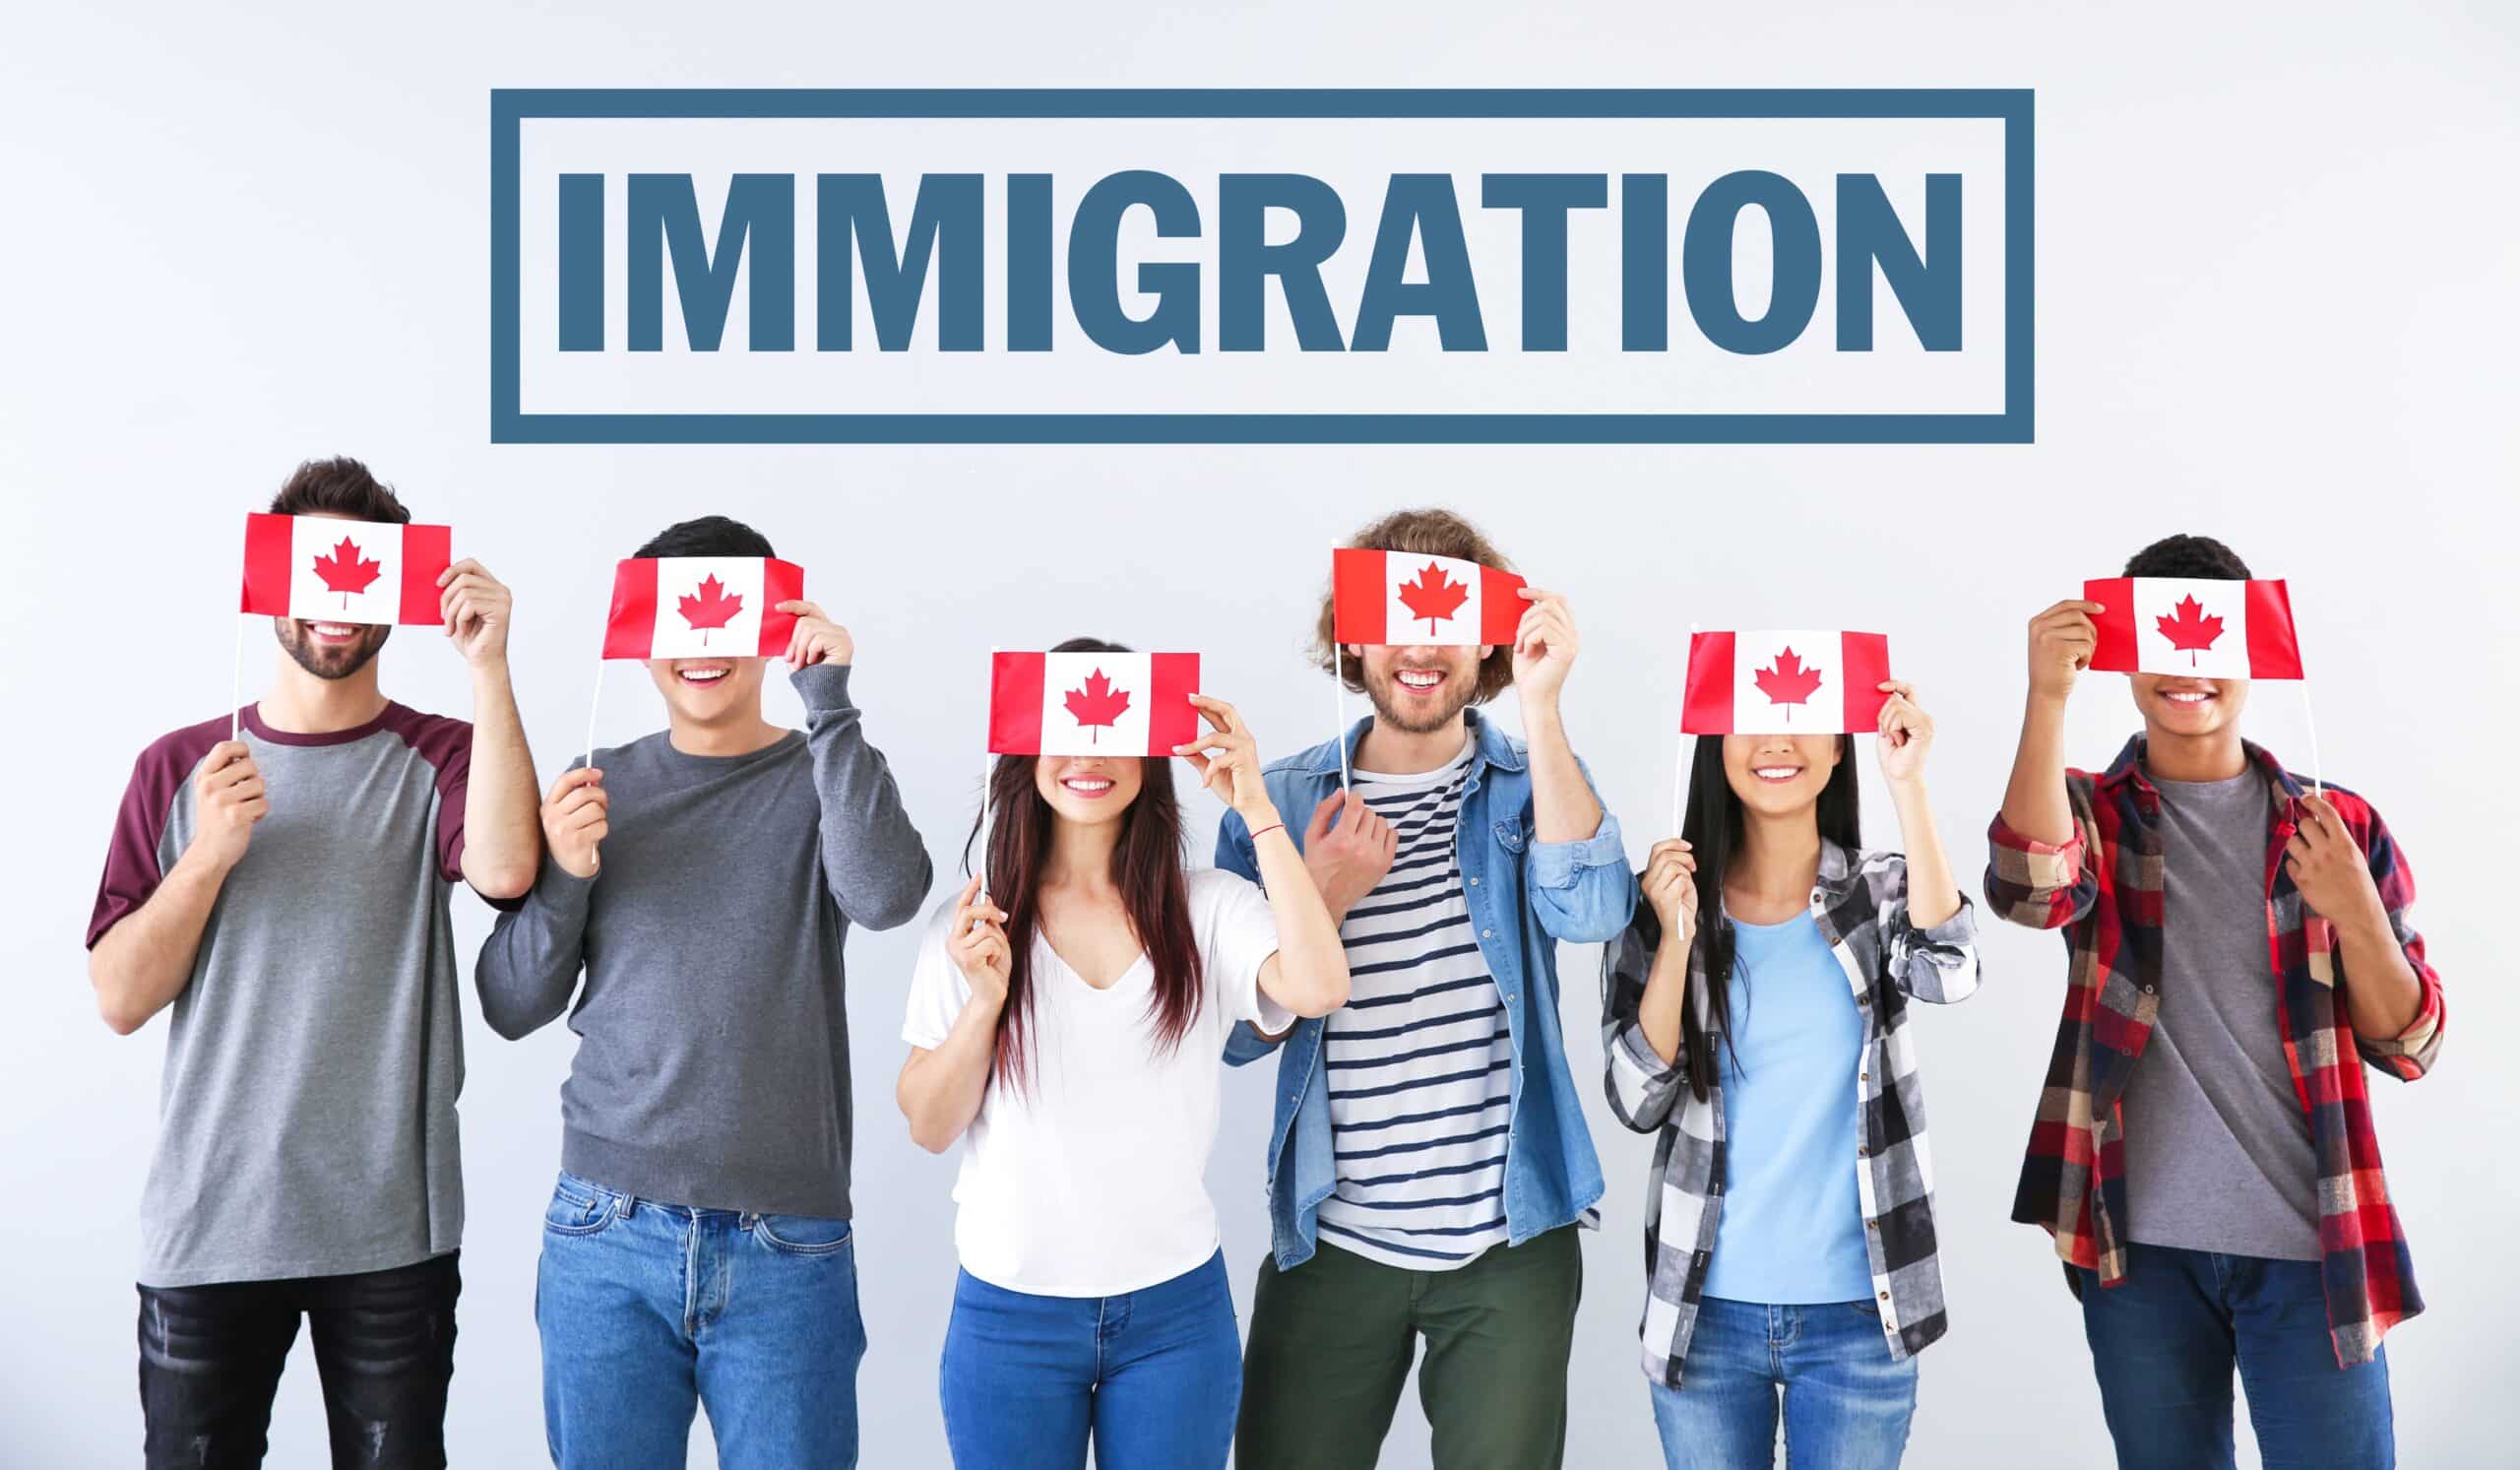 Immigrate to Canada